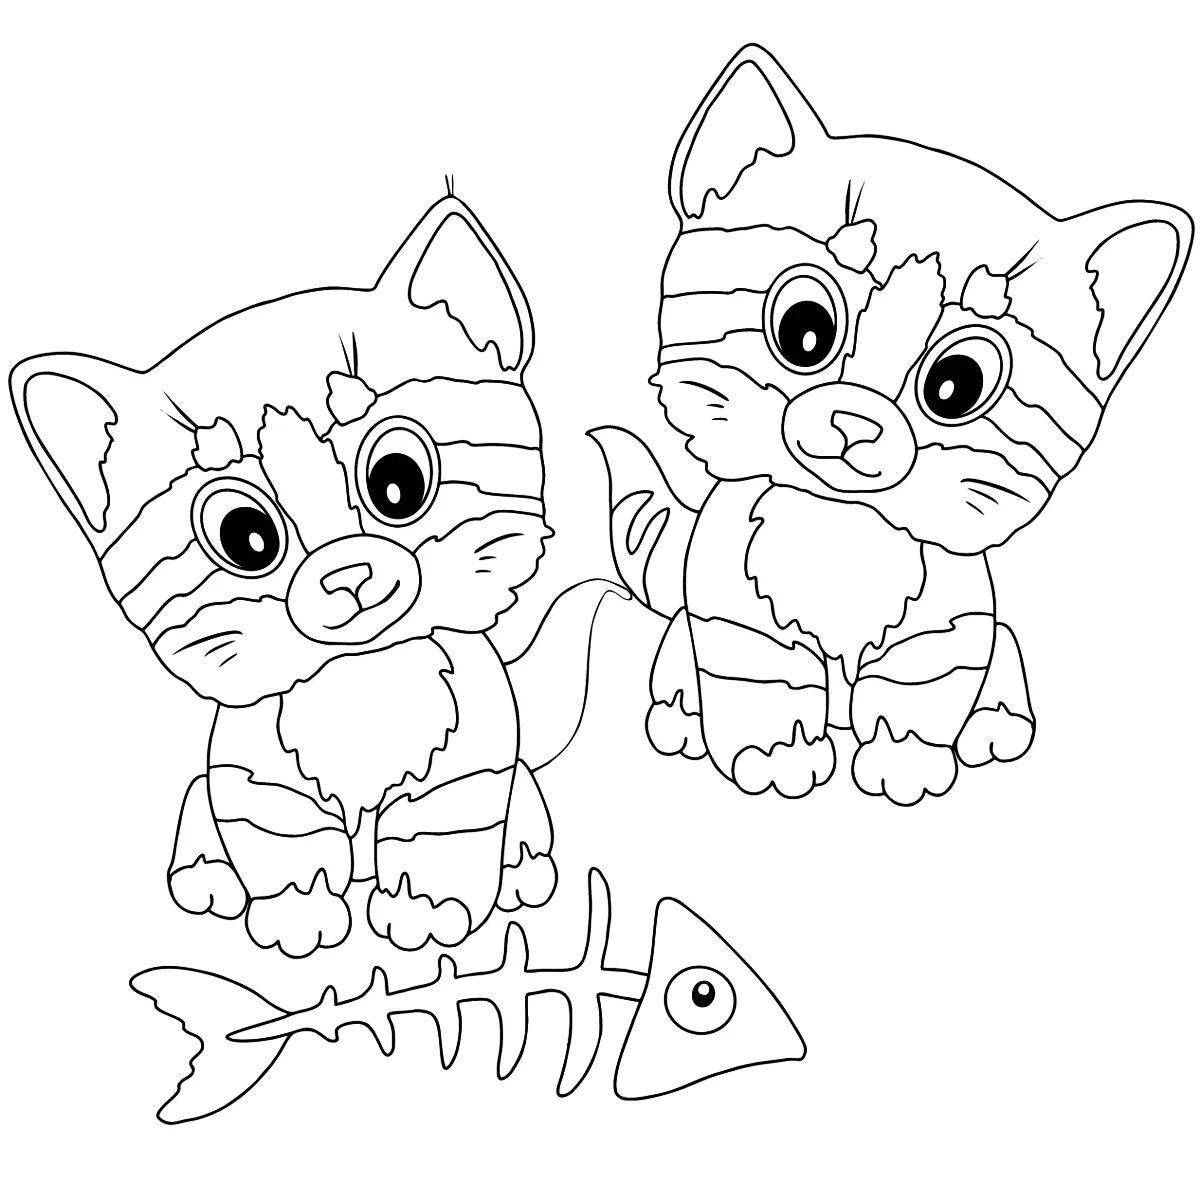 Coloring book of a mischievous tabby kitten